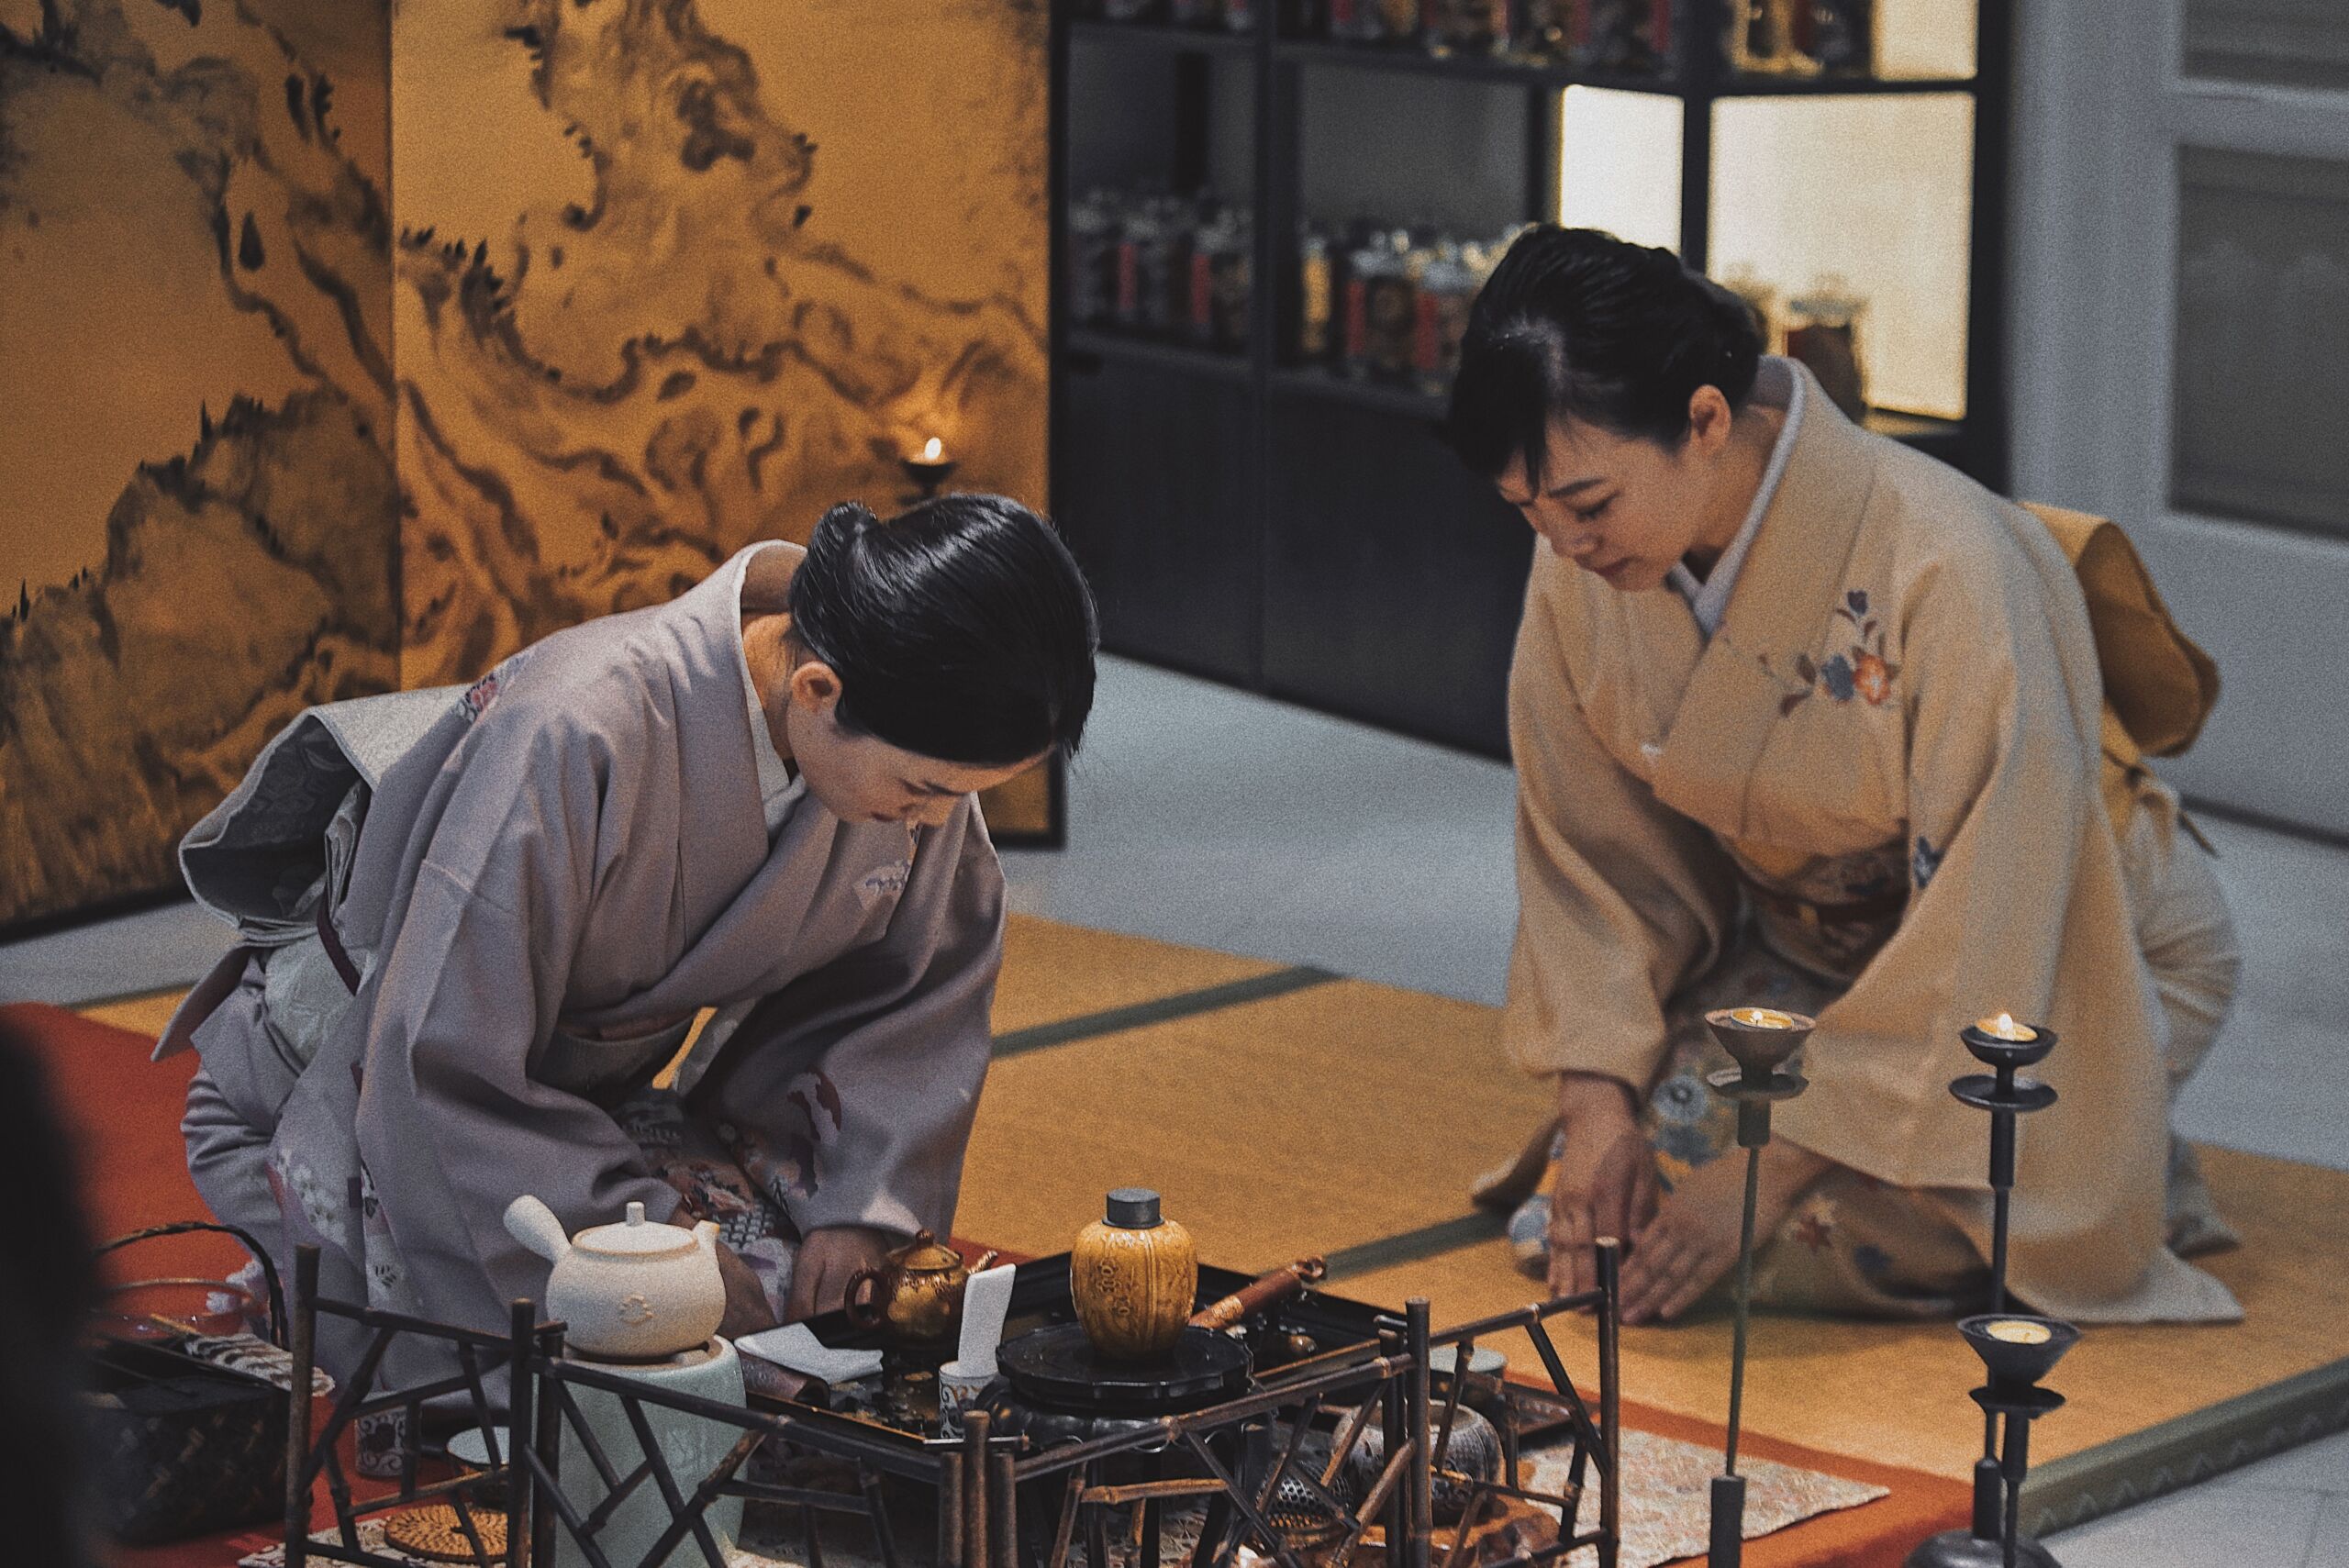 The Art of Japanese Hospitality Two women preparing tea in a traditional Japanese way, sitting on their knees in front of a low table